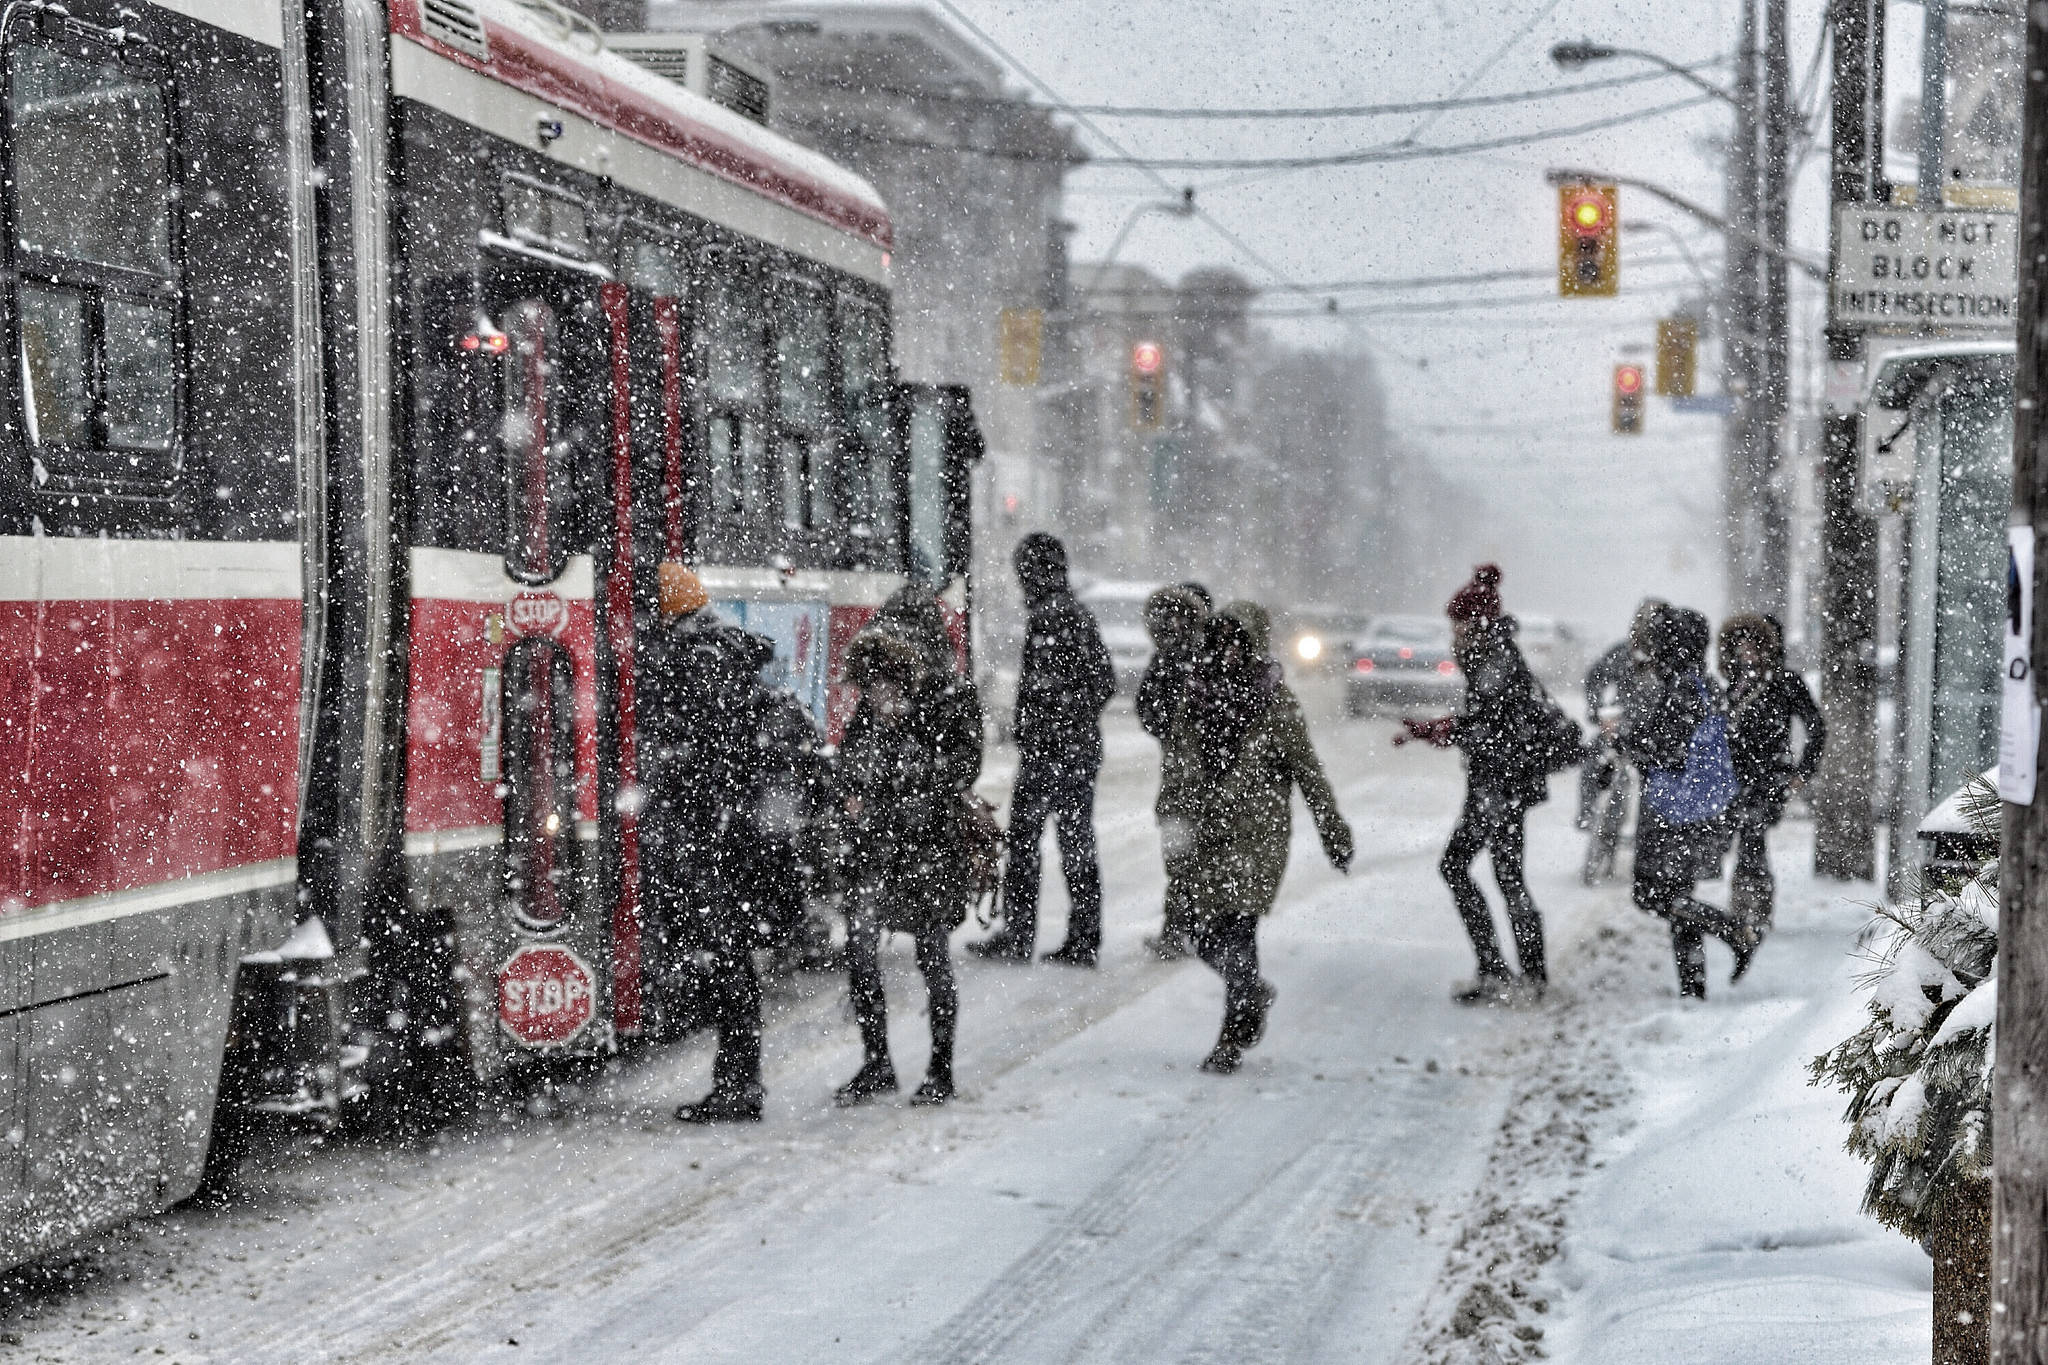 Toronto's first snowfall of the season expected this week